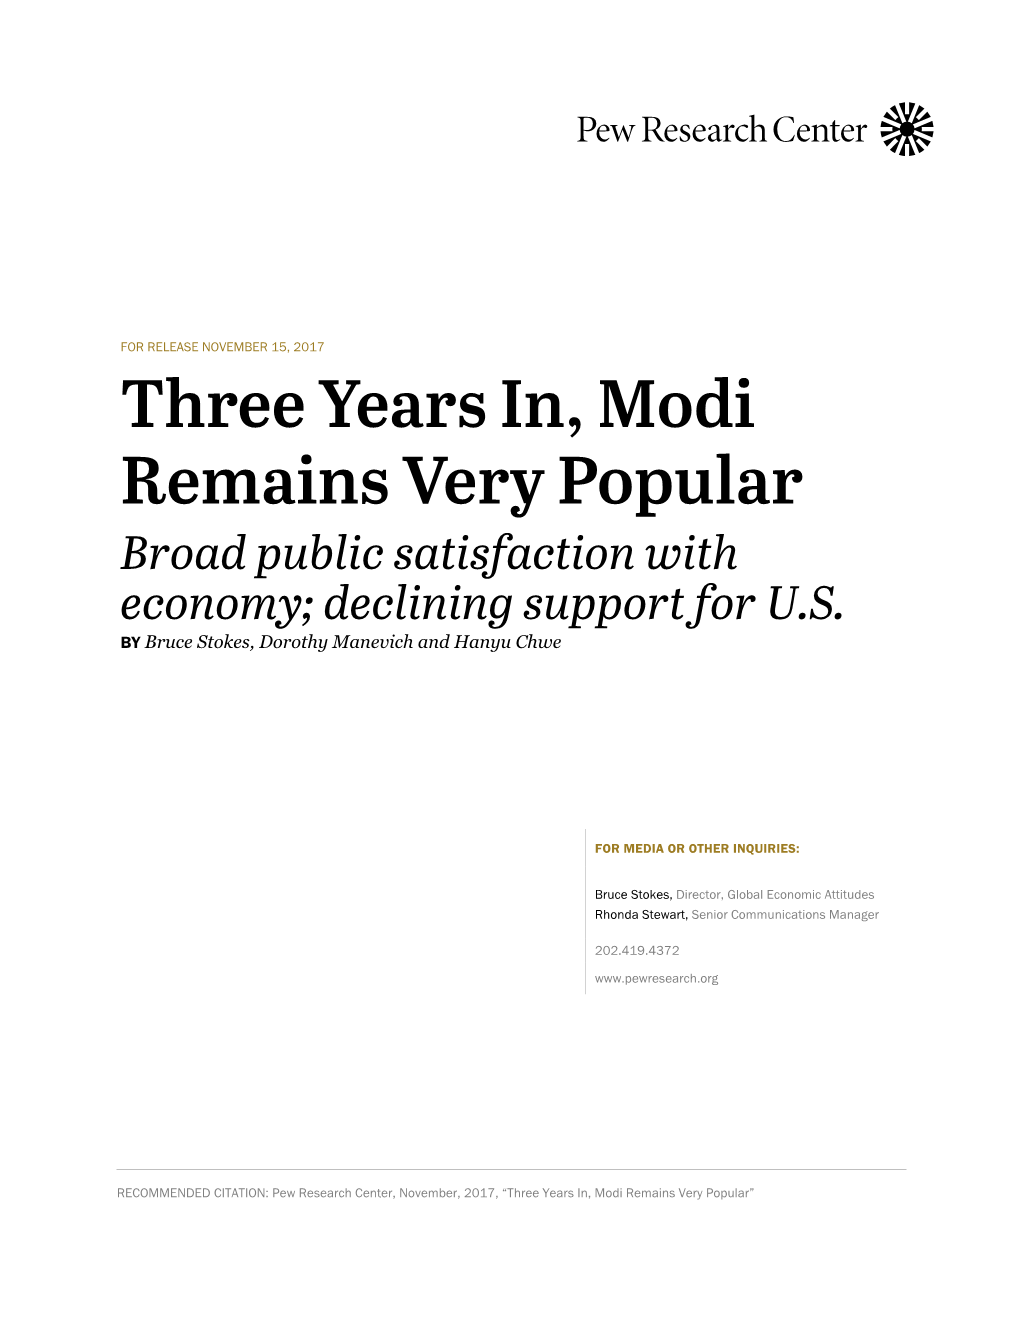 Three Years In, Modi Remains Very Popular Broad Public Satisfaction with Economy; Declining Support for U.S